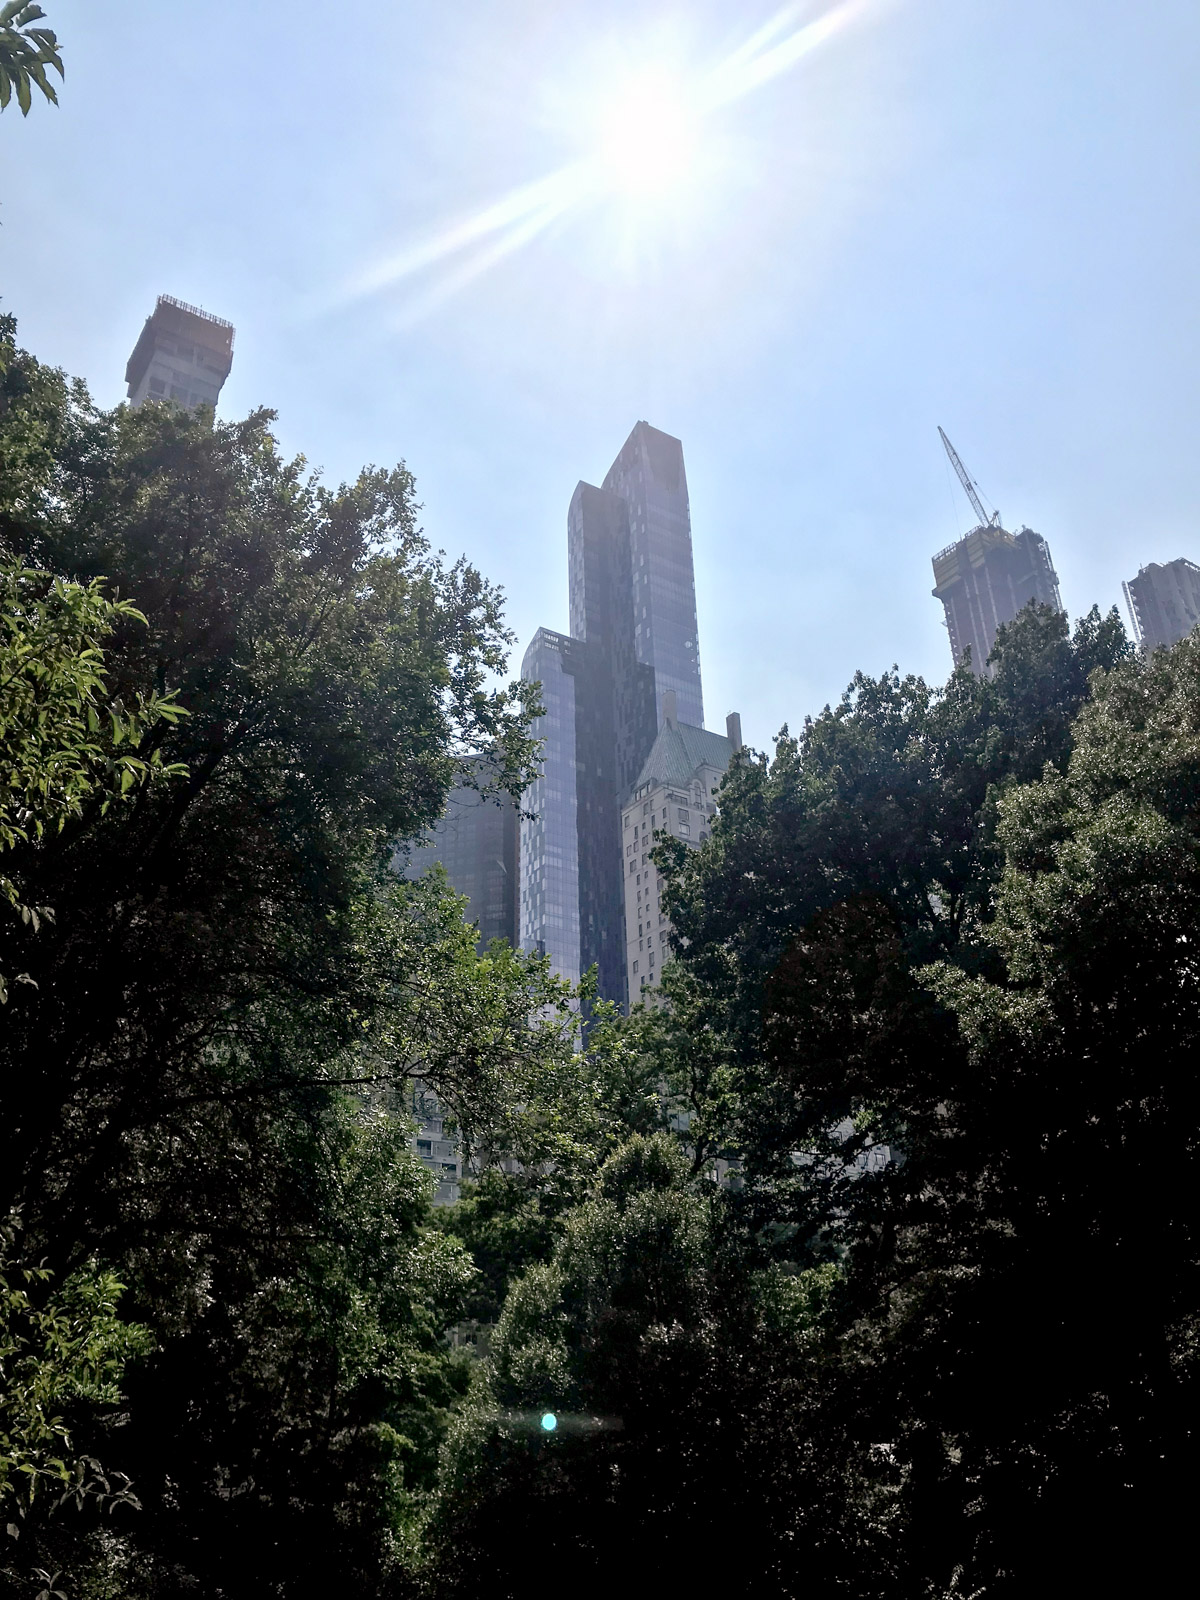 A low angle shot of trees in a park, in the background are very tall skyscrapers.